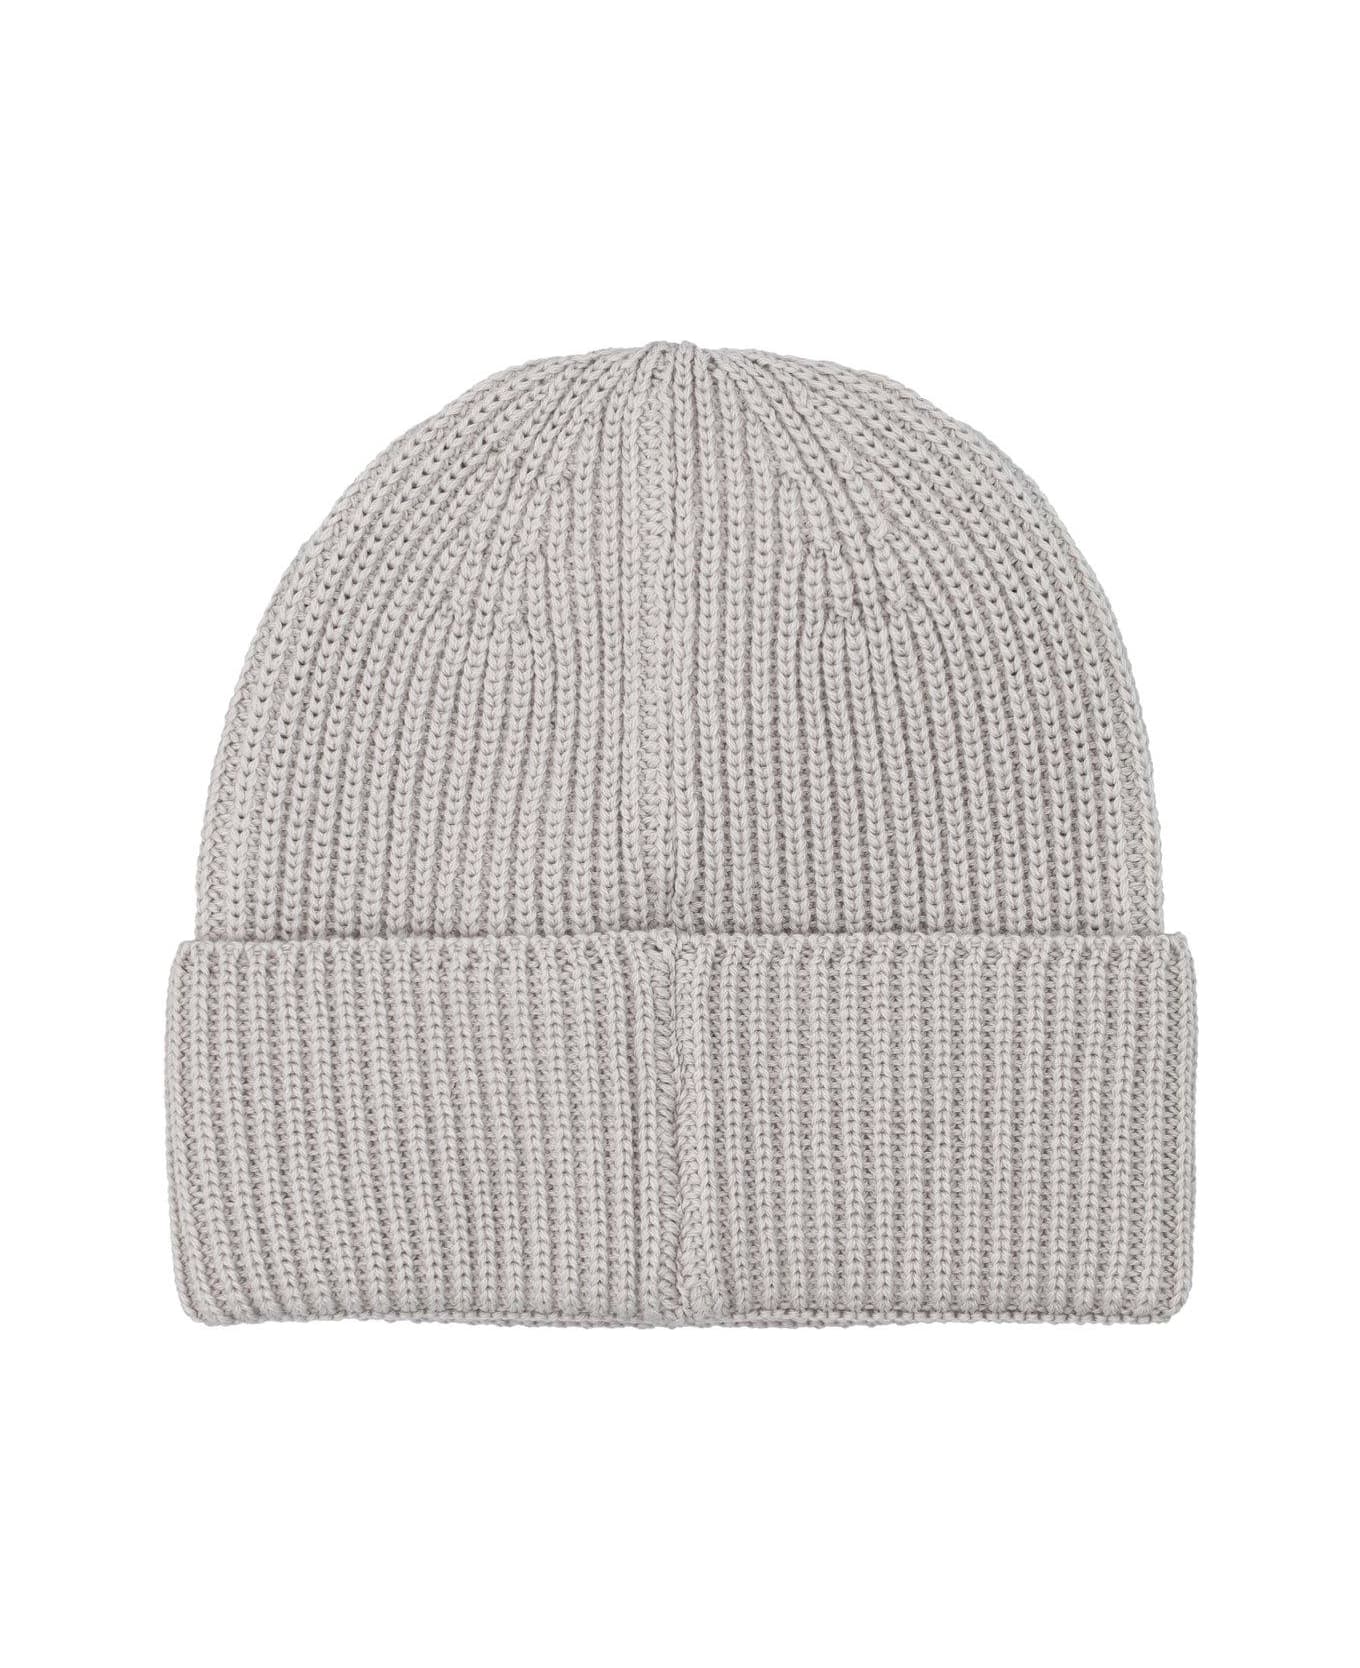 MSGM Logo Embroidered Knitted Beanie